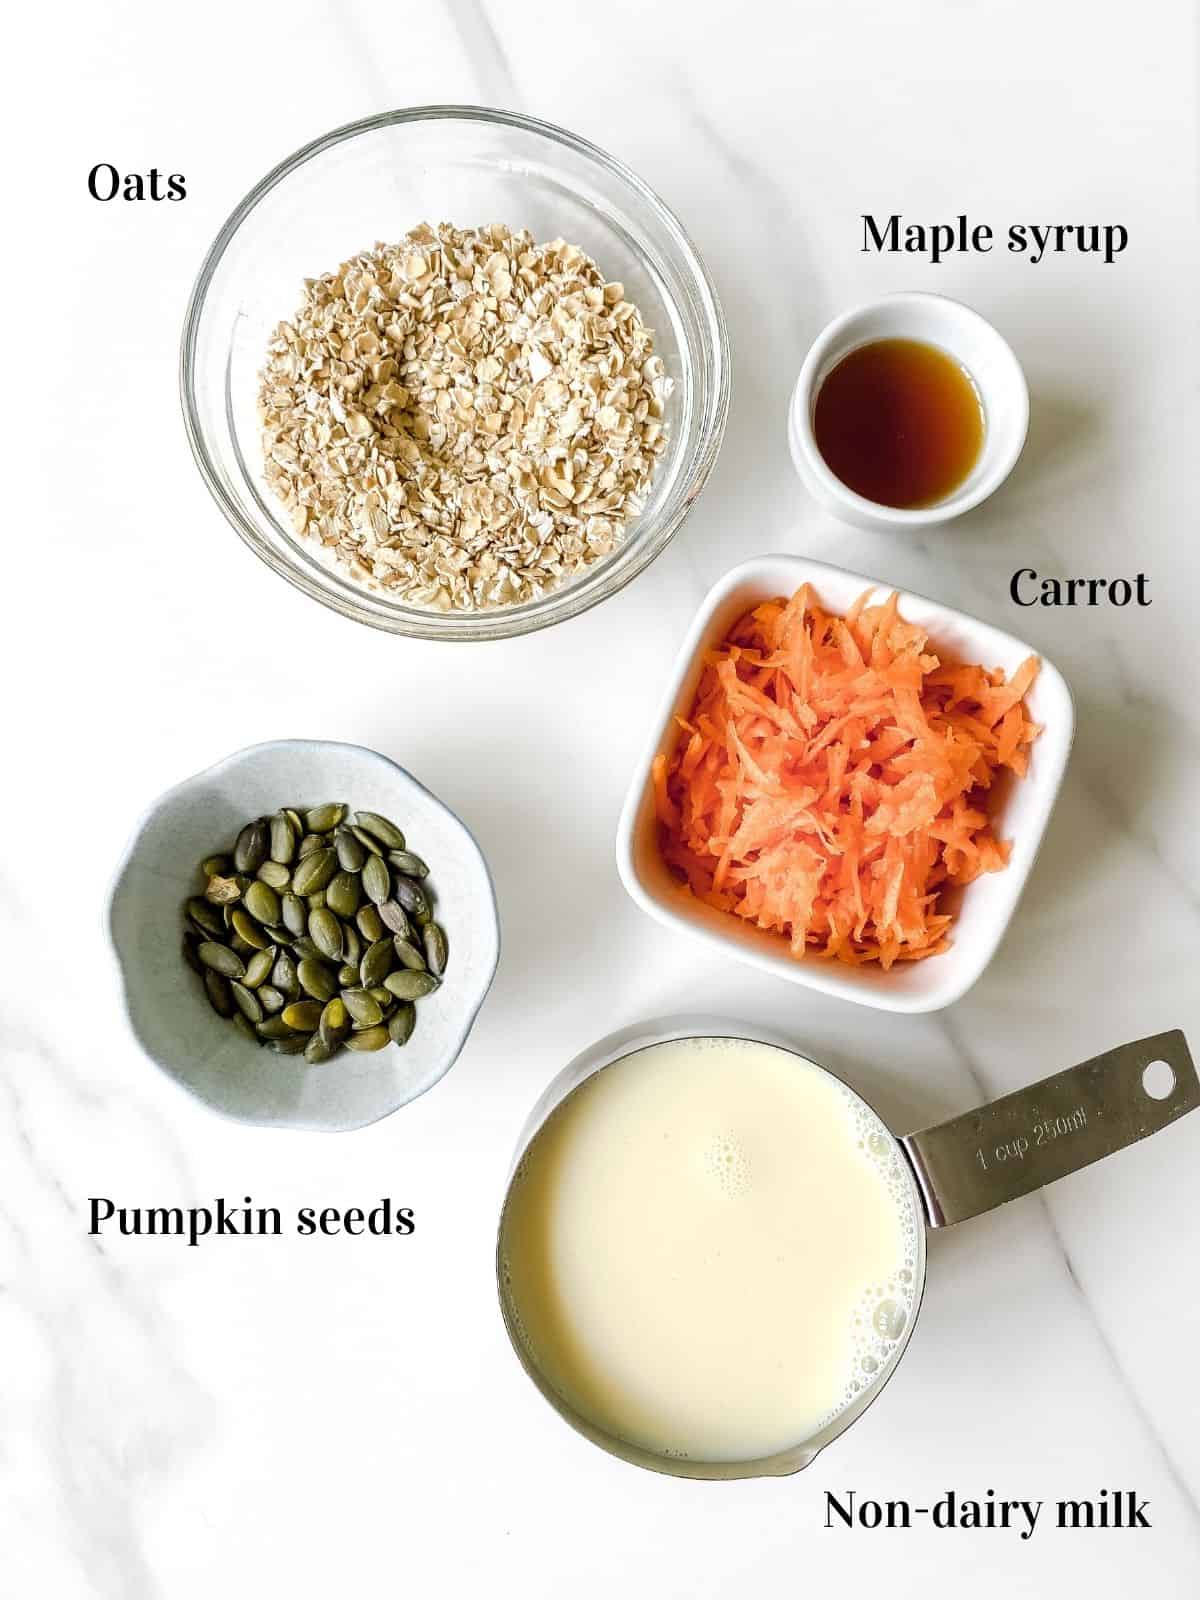 carrots, oats, maple syrup, pumpkin seeds and non-dairy milk